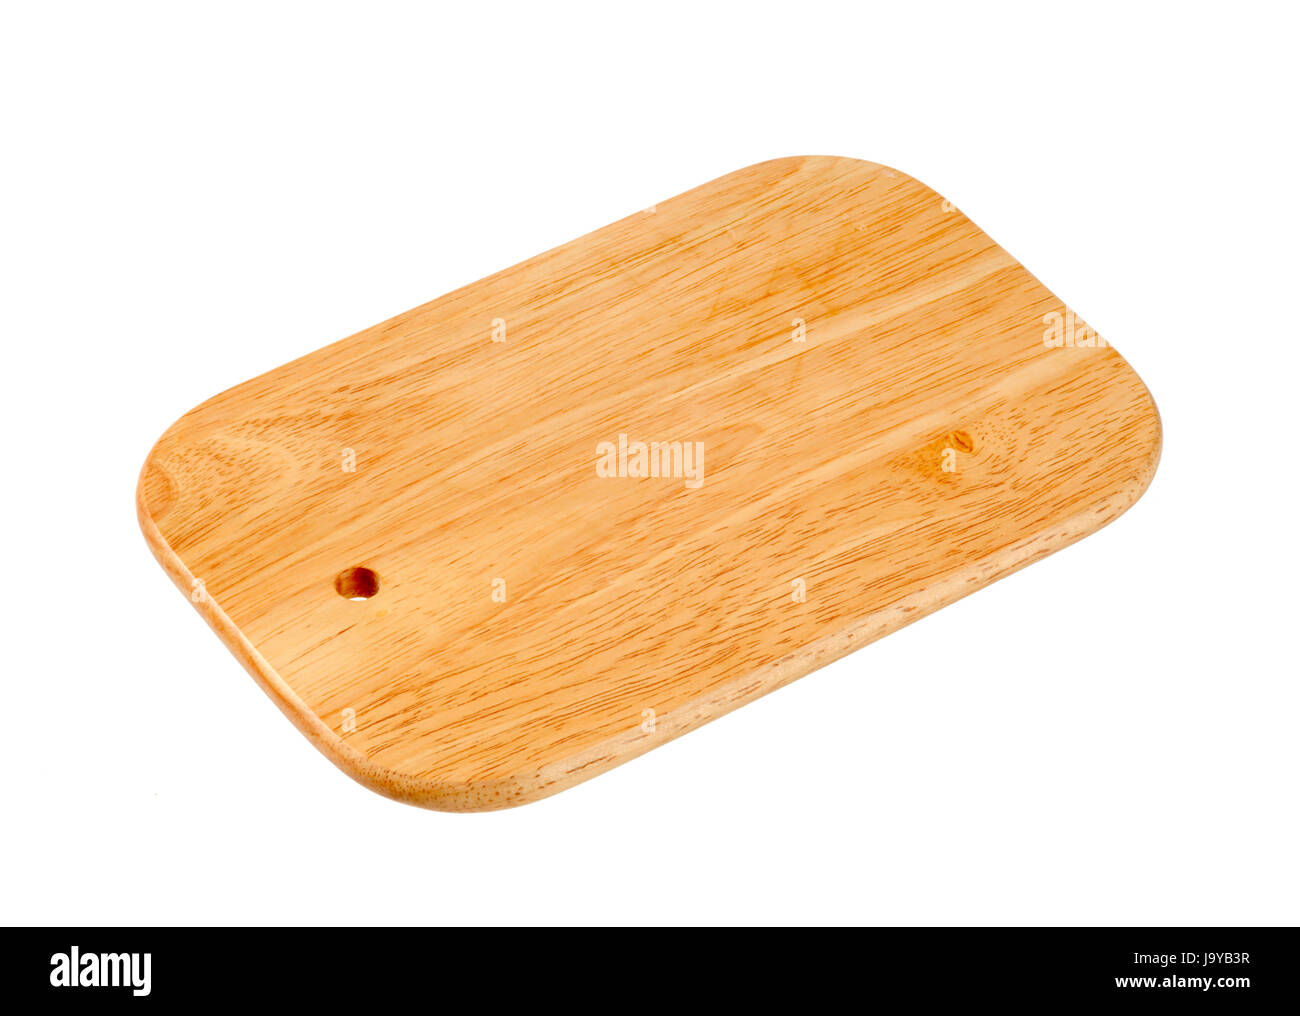 object, isolated, one, smooth, wooden, rectangle, cutout, breadboard, cutting Stock Photo